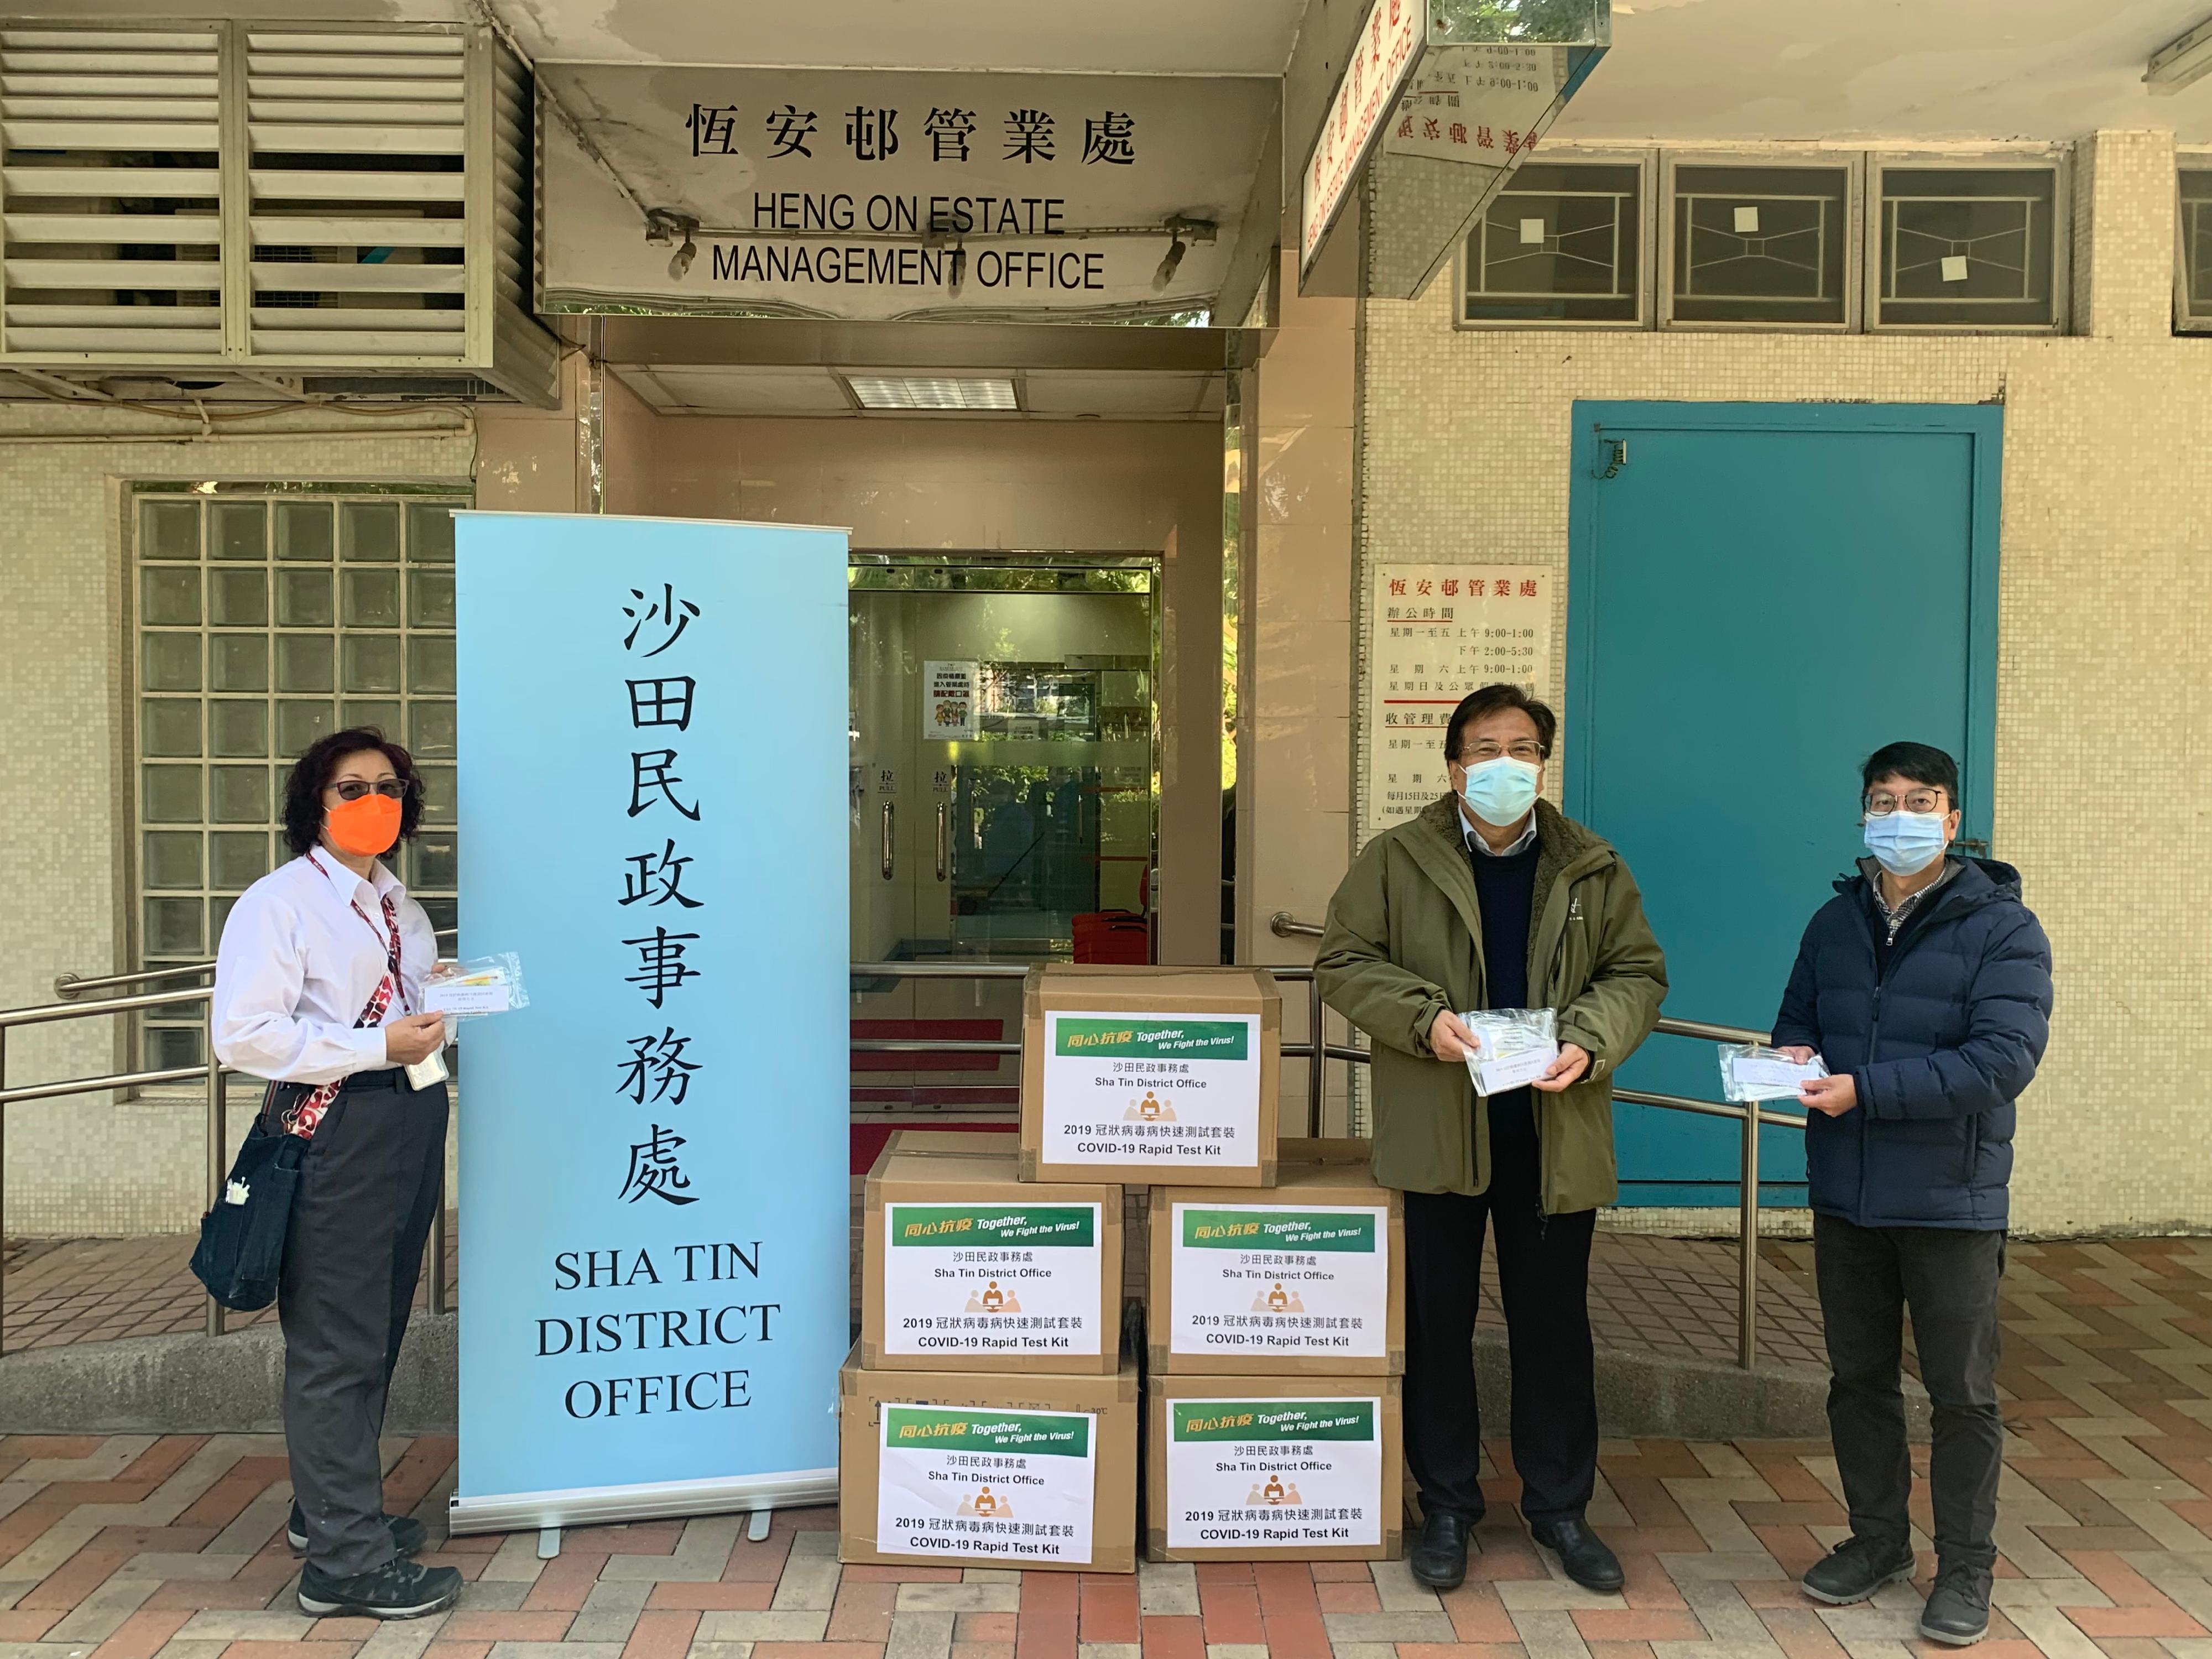 The Sha Tin District Office today (February 24) distributed COVID-19 rapid test kits to households, cleansing workers and property management staff living and working in Heng Fung House of Heng On Estate in Ma On Shan for voluntary testing through the Housing Department and the property management company.